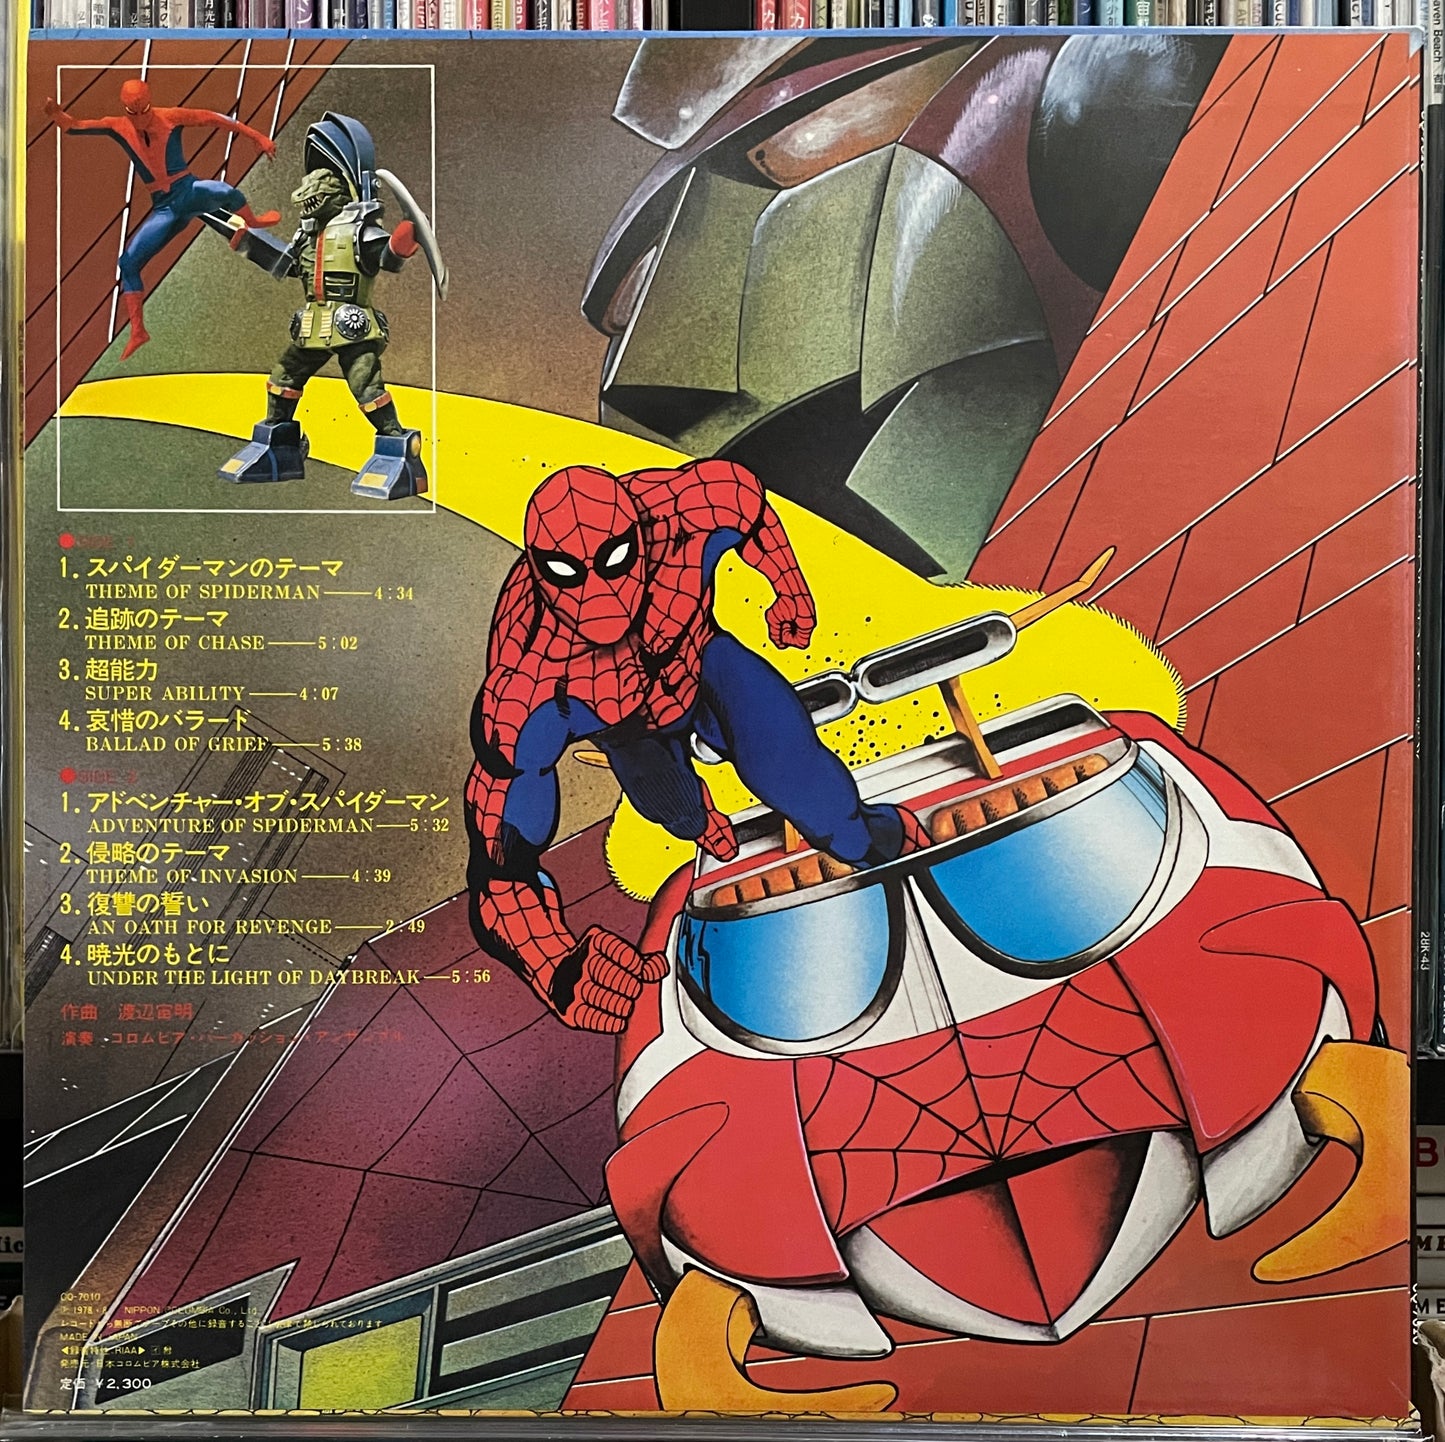 Chumei Watanabe "Eccentric Sounds Of Spider-Man" (1978)